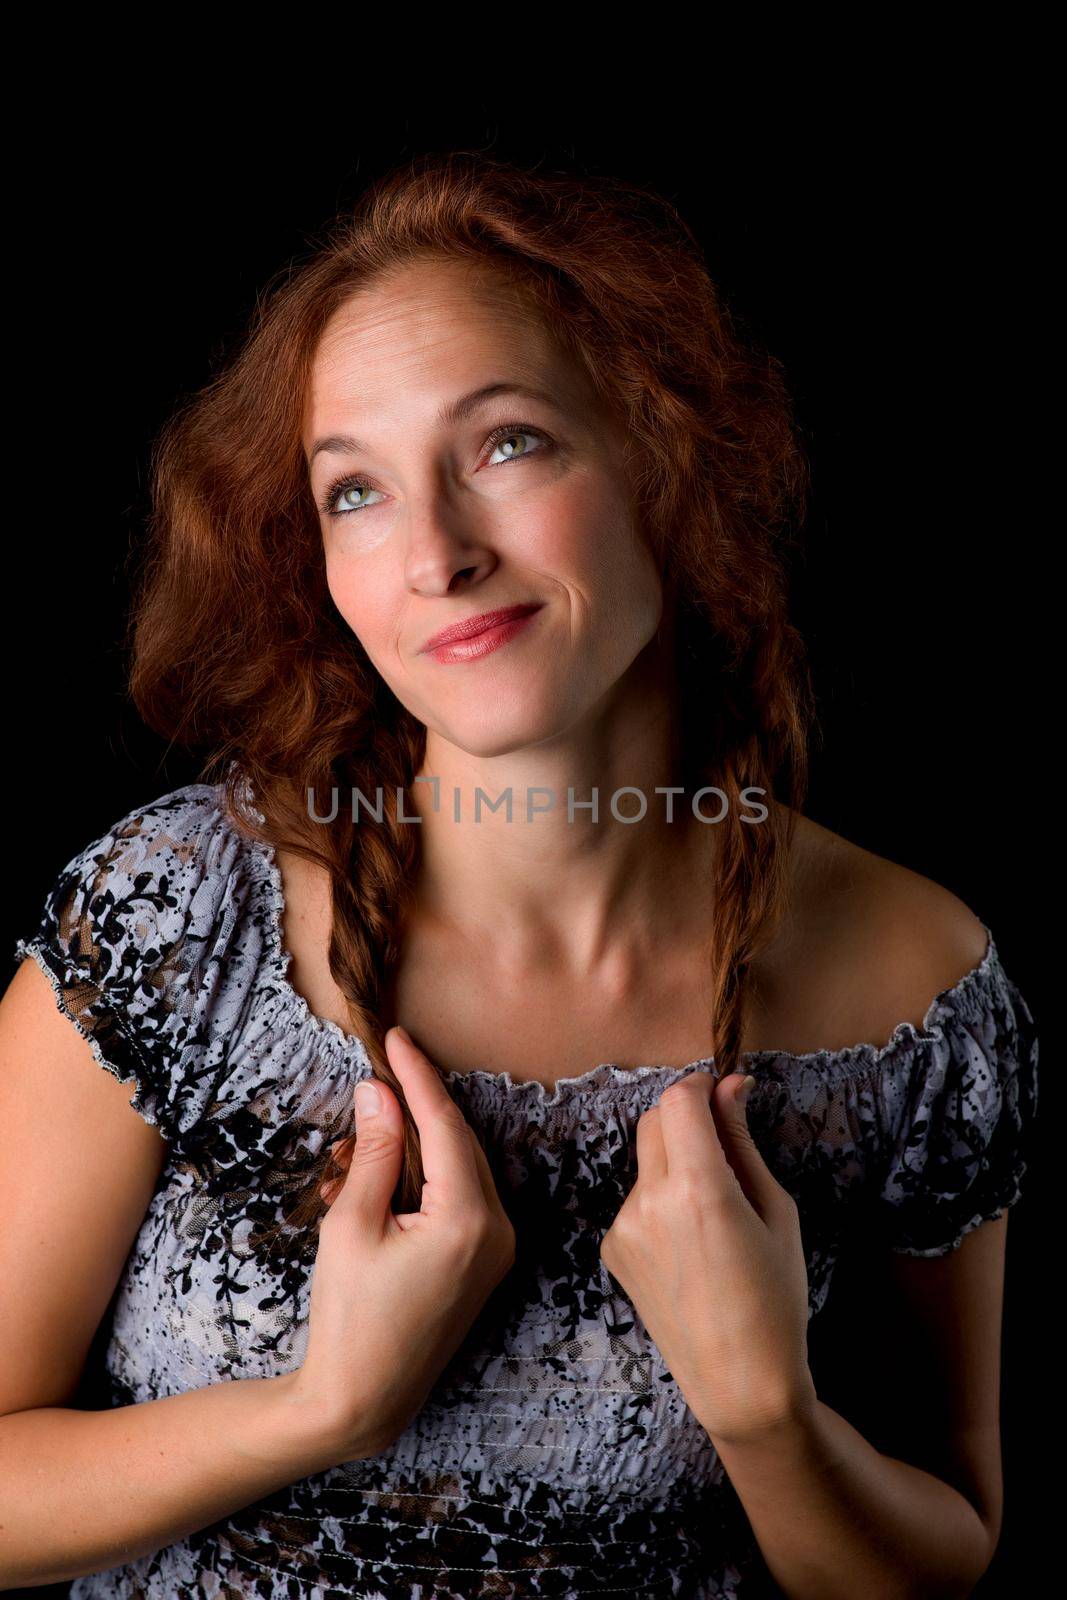 Portrait of happy woman holding two ponytails. Young woman smiling at camera against black background. Beautiful woman with brown hair wearing grey dress posing in studio